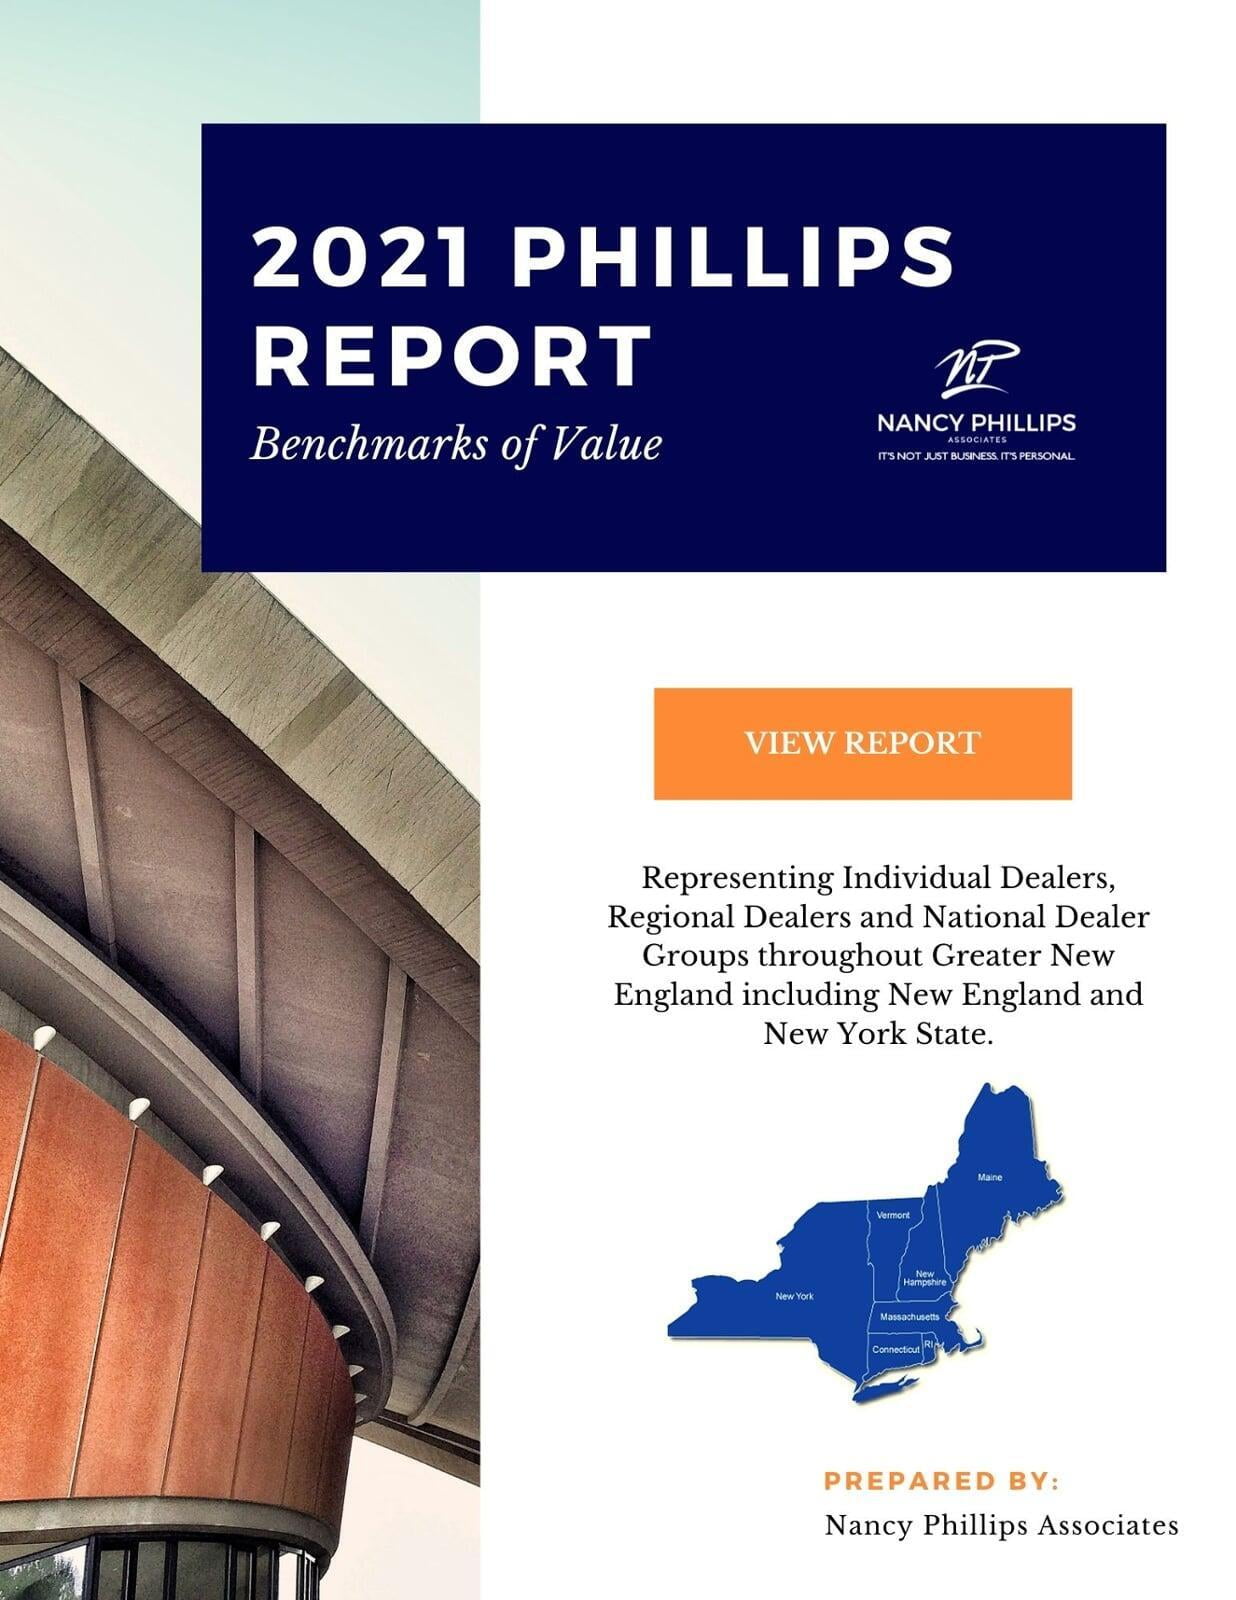 The Phillips Report - 2021 Dealership Values in Greater New England